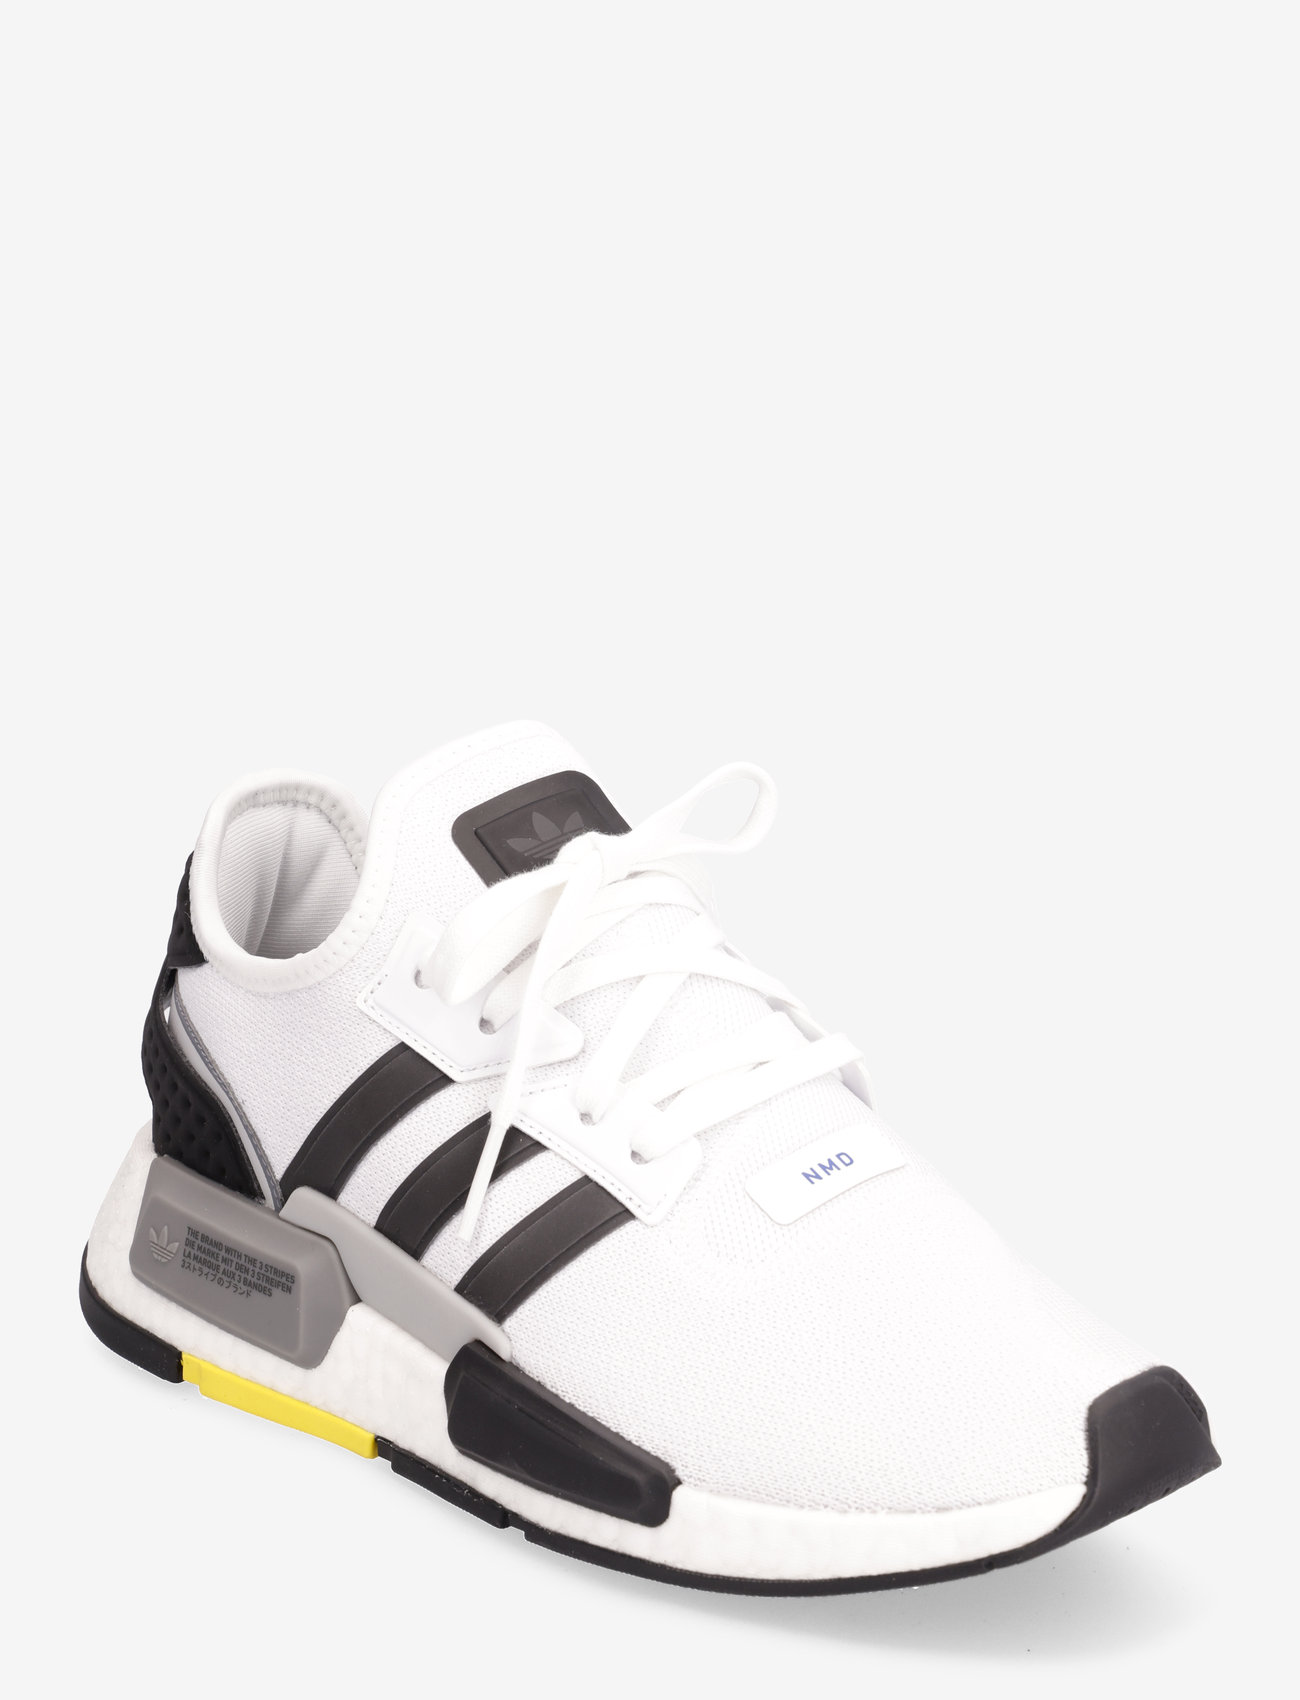 adidas Originals - NMD_G1 Shoes - lage sneakers - ftwwht/cblack/gresix - 0